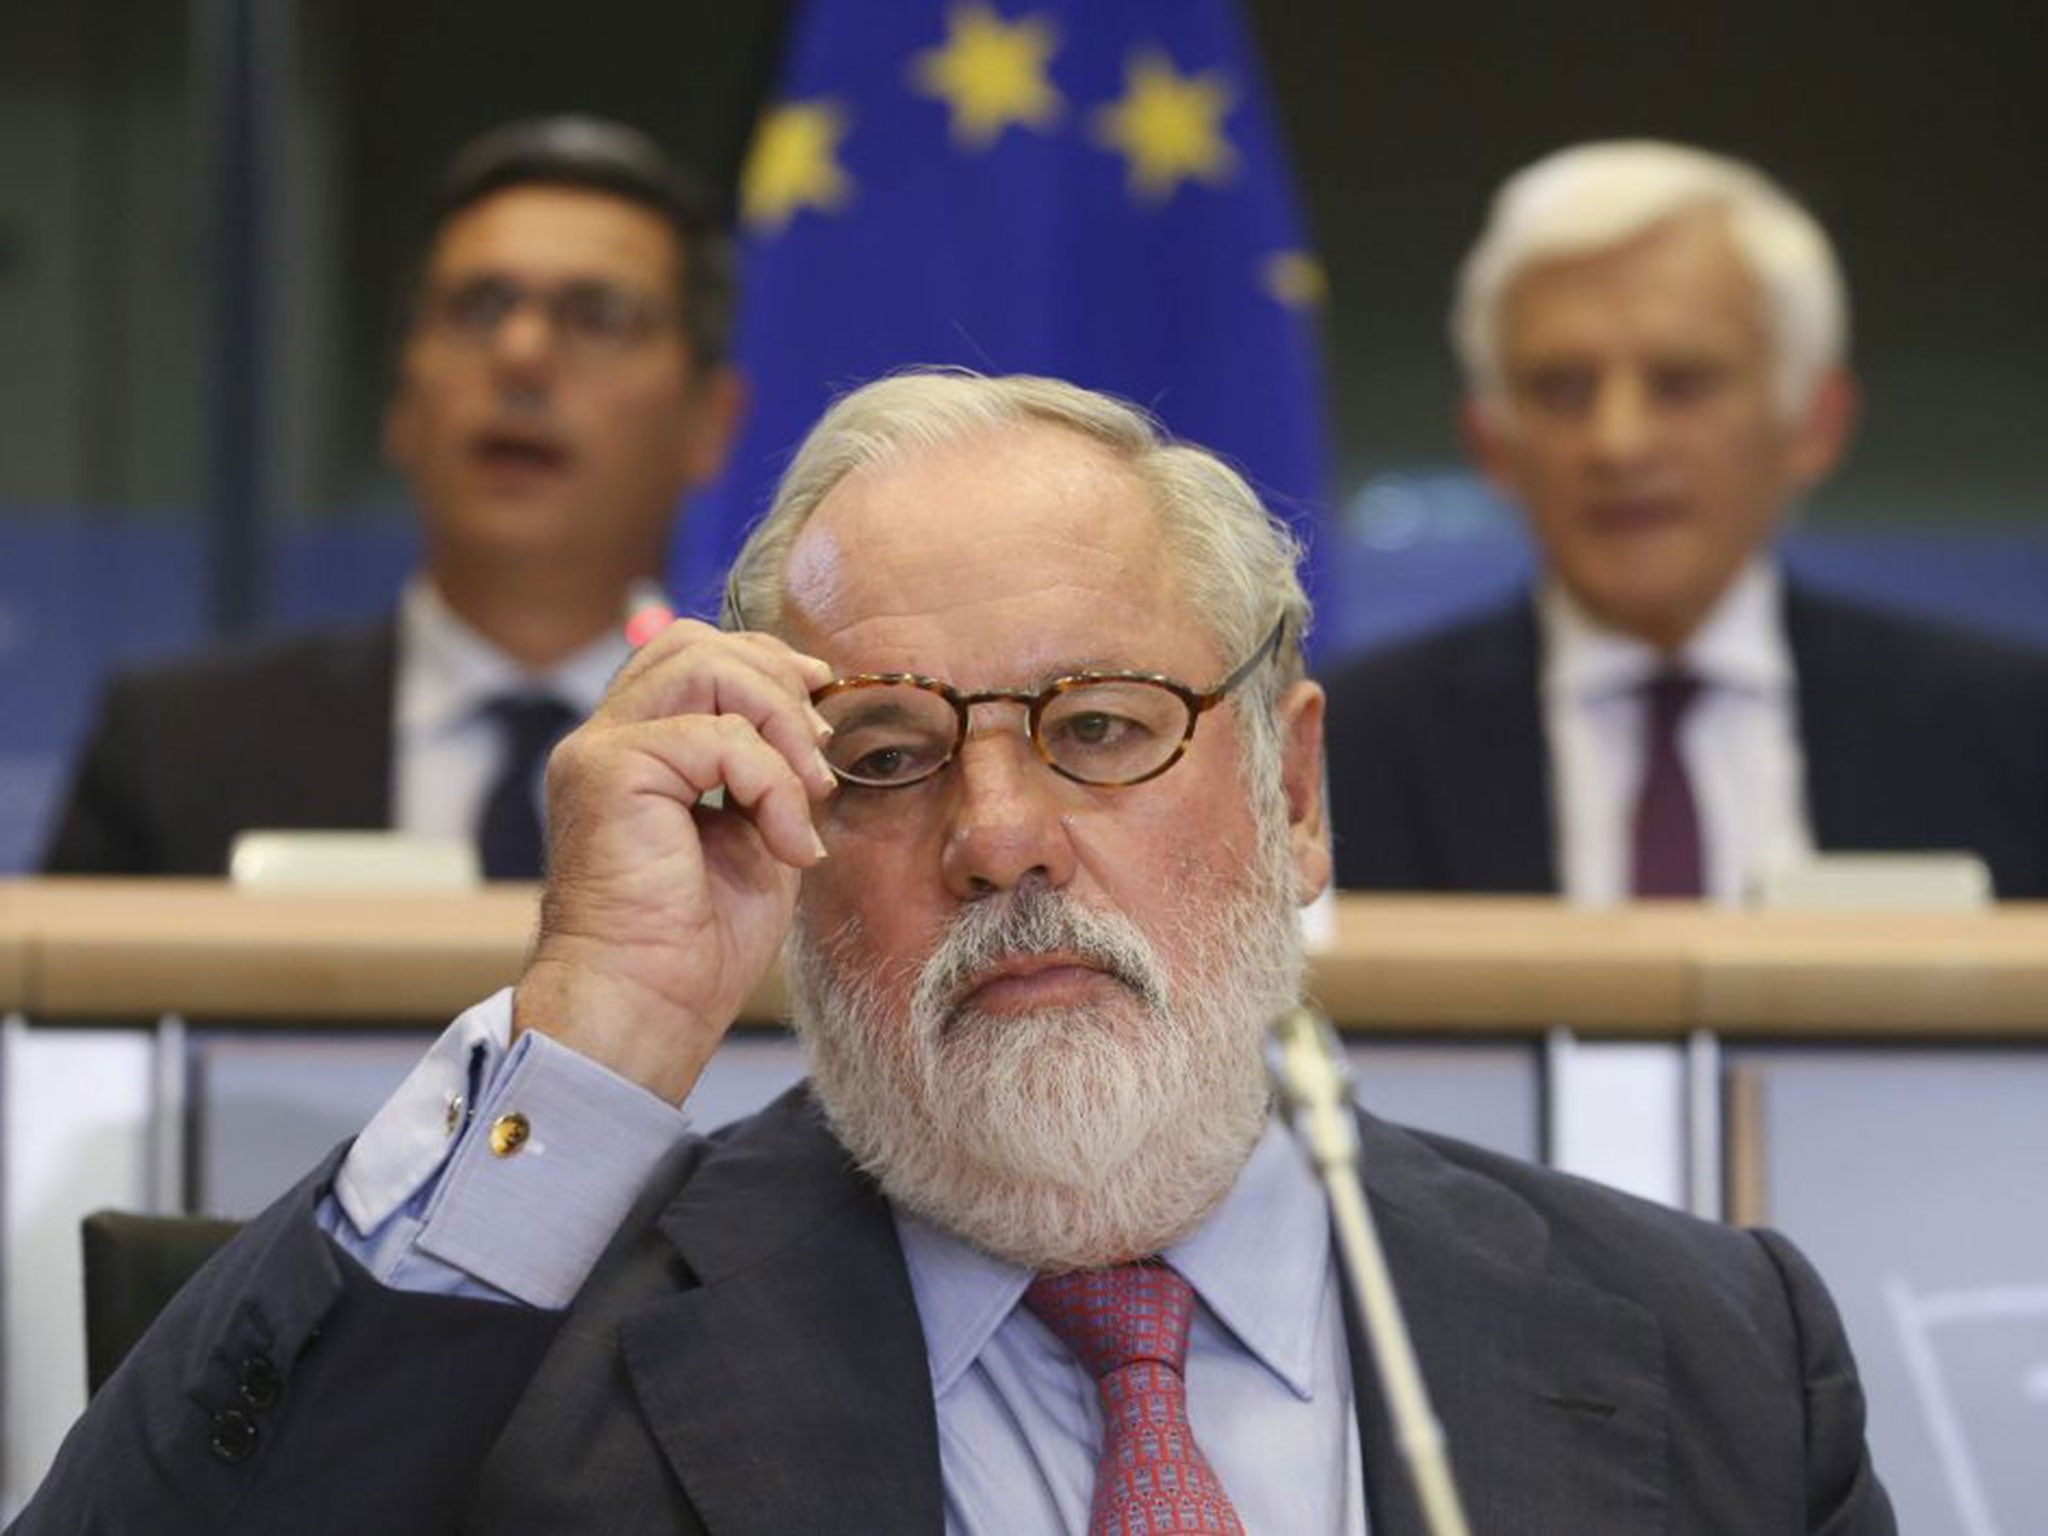 The appearance of Miguel Arias Canete at a Brussels hearing last Wednesday caused 100,000 people to sign a petition to prevent his appointment